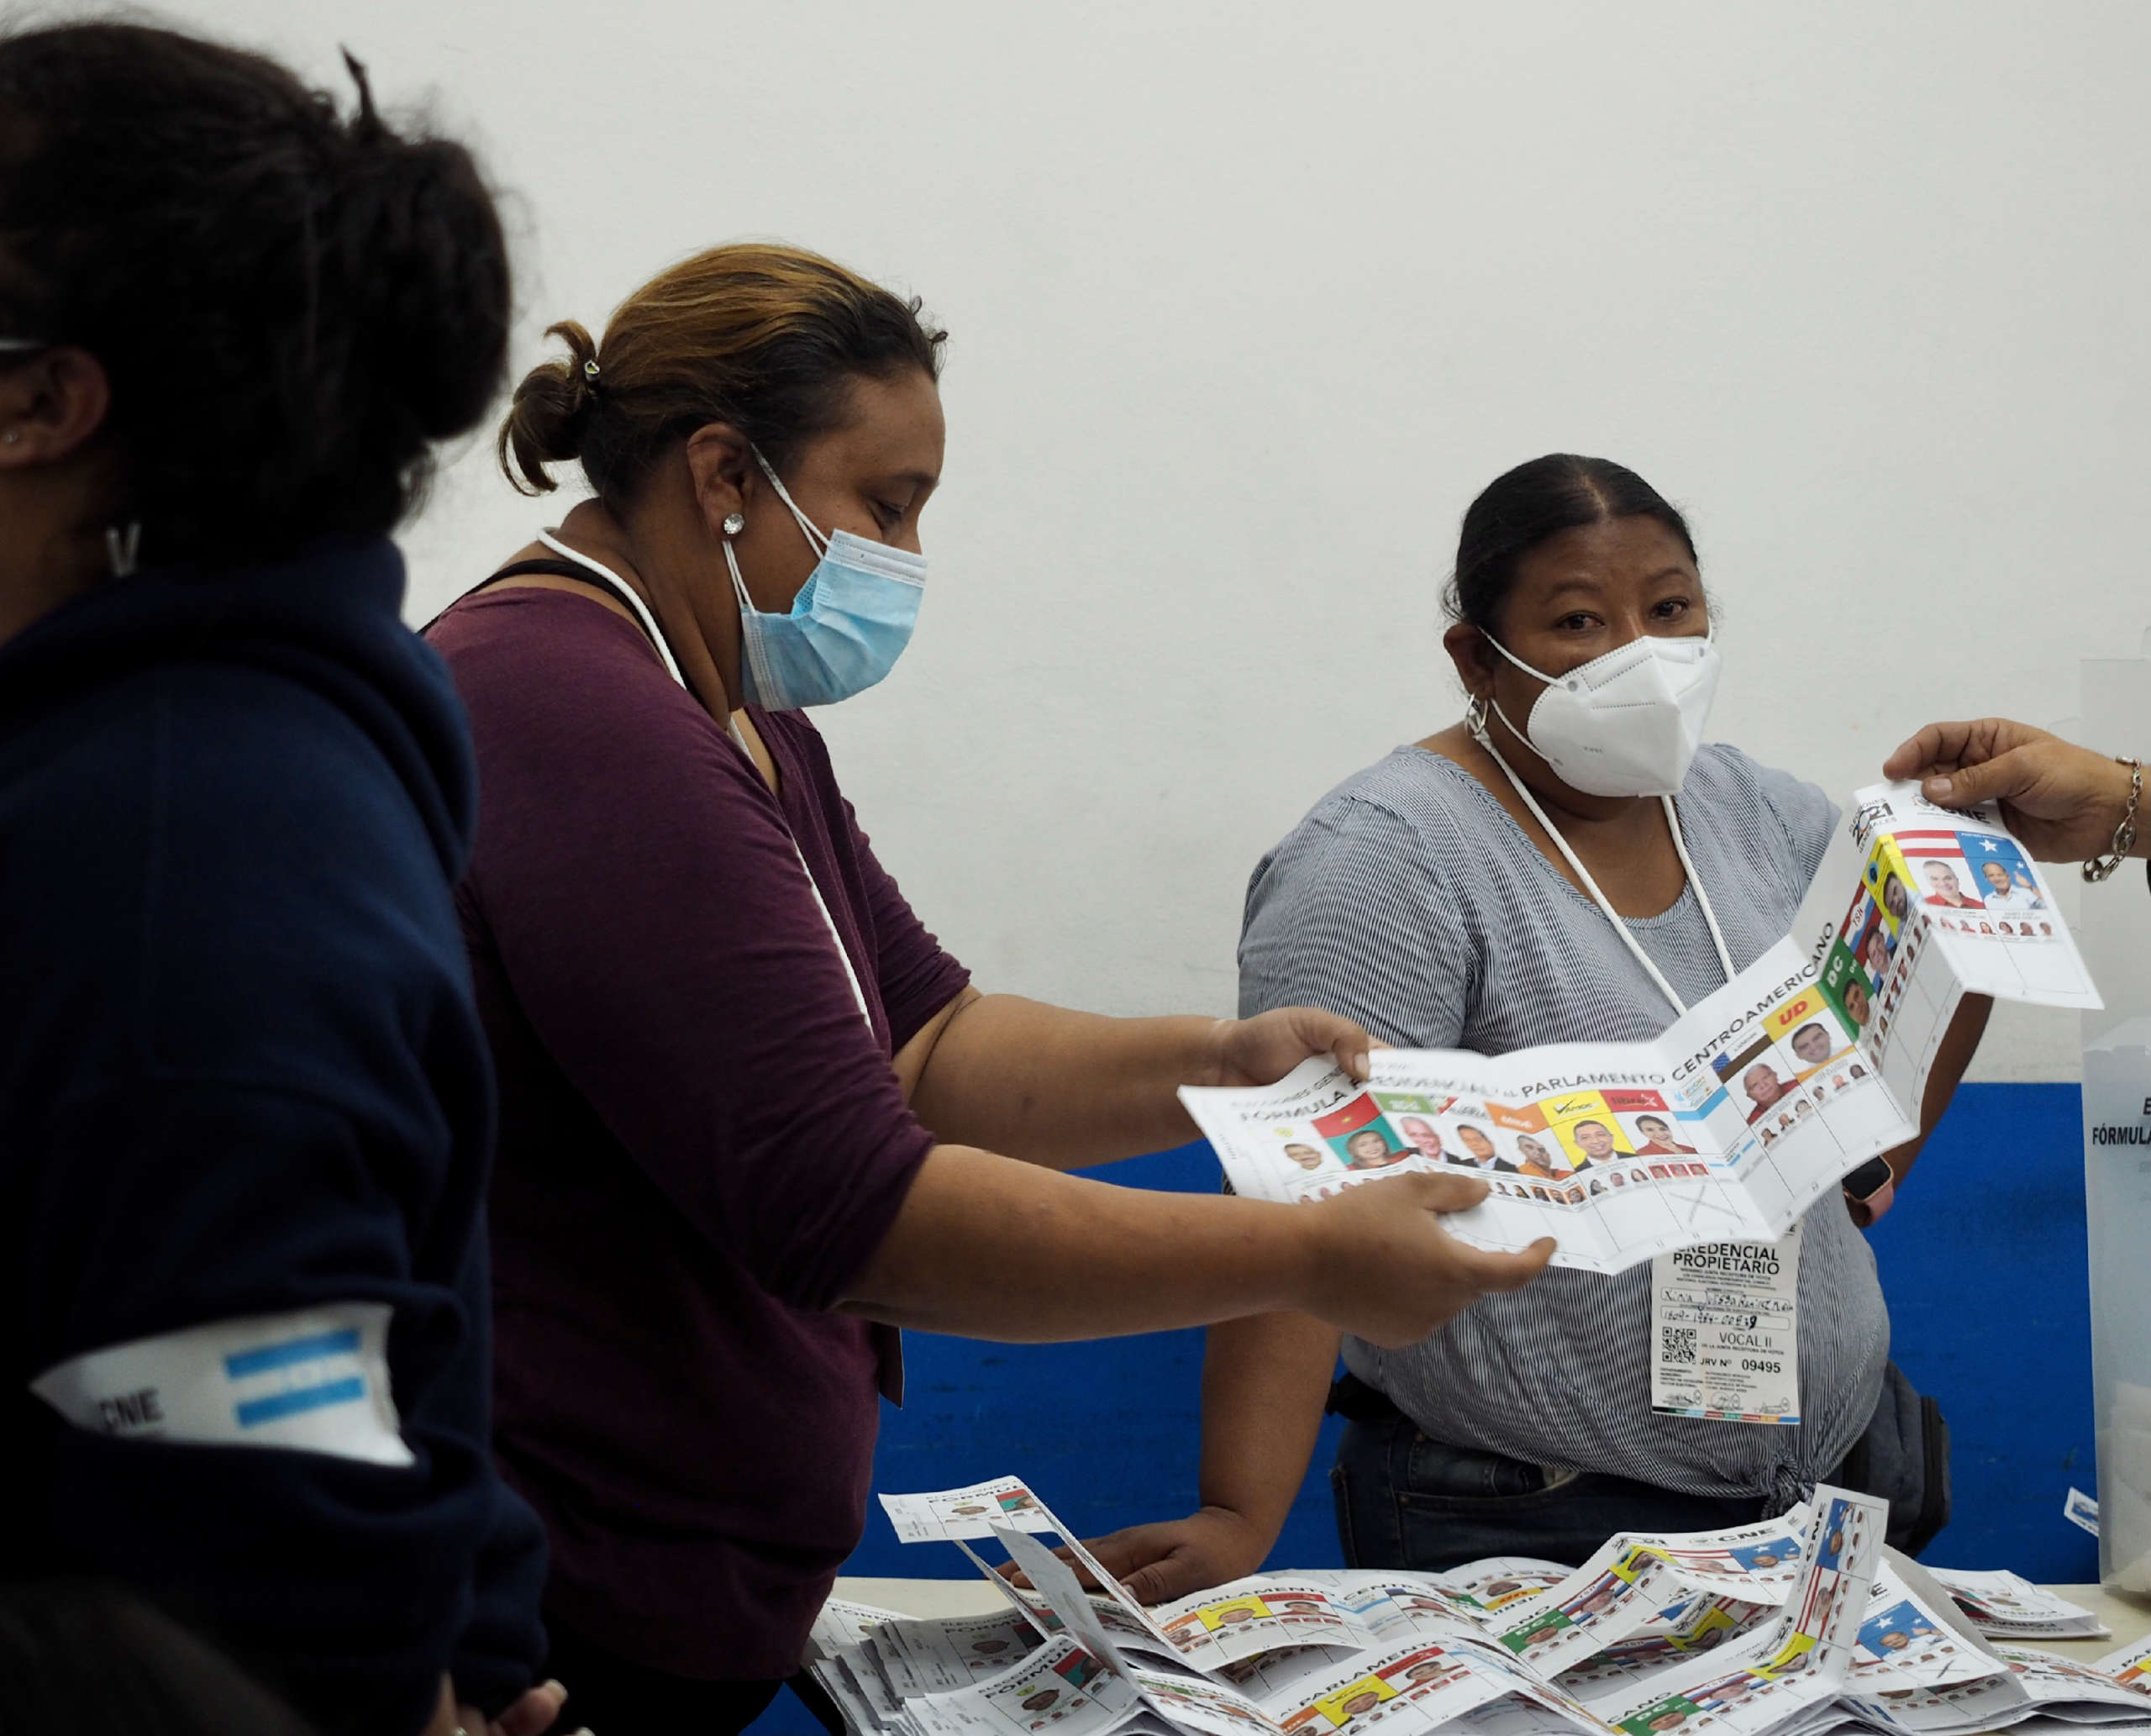 Election workers review and tabulate the votes at the end of election day, Tegucigalpa, November 28, 2021.